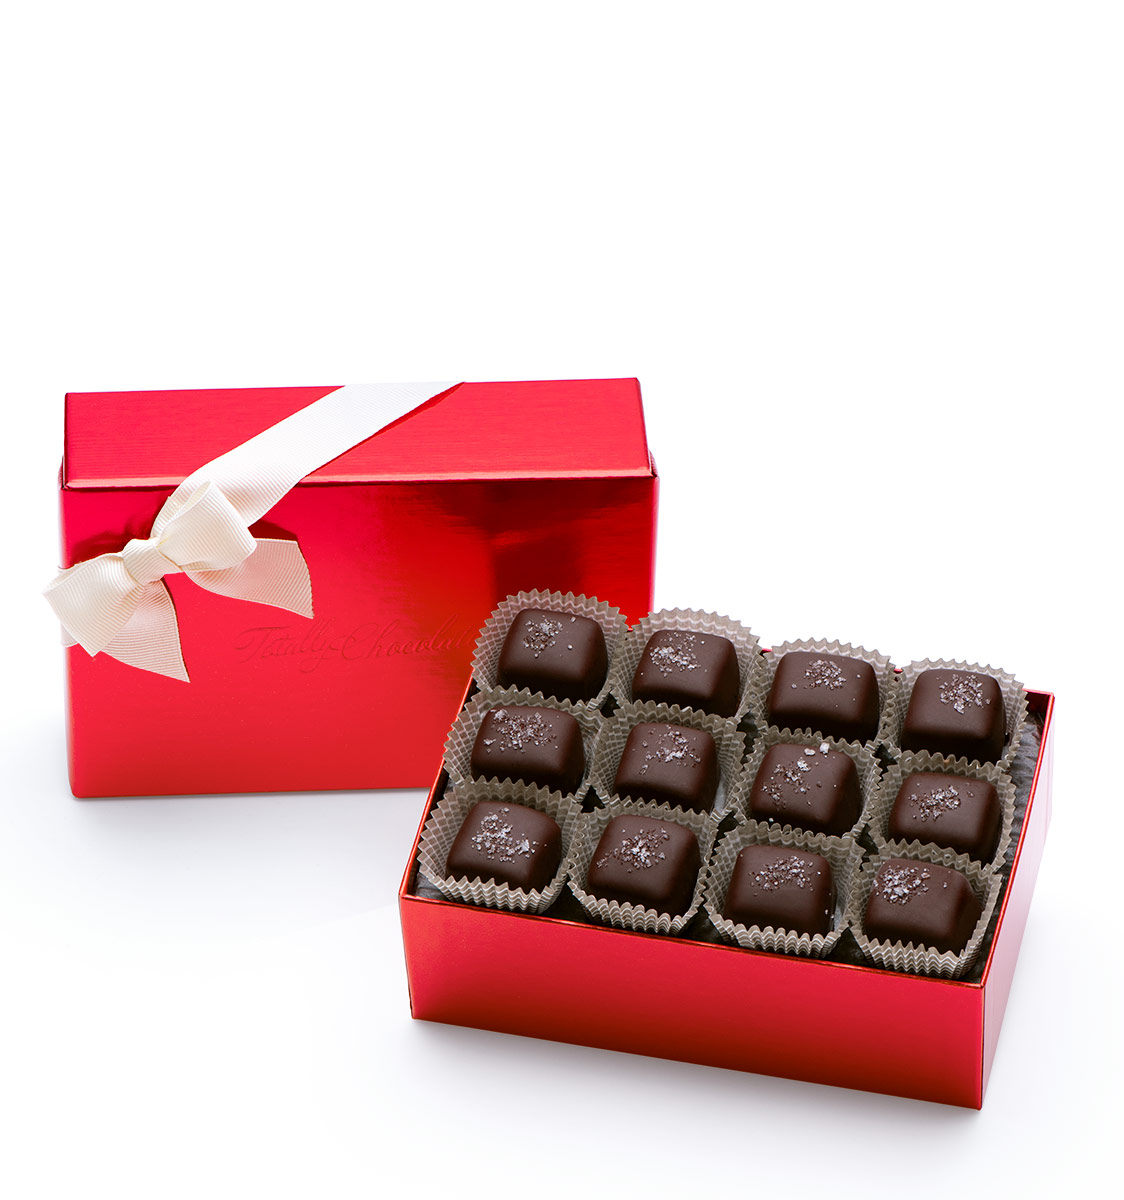 Is Chocolate a Good Gift? - Totally Chocolate